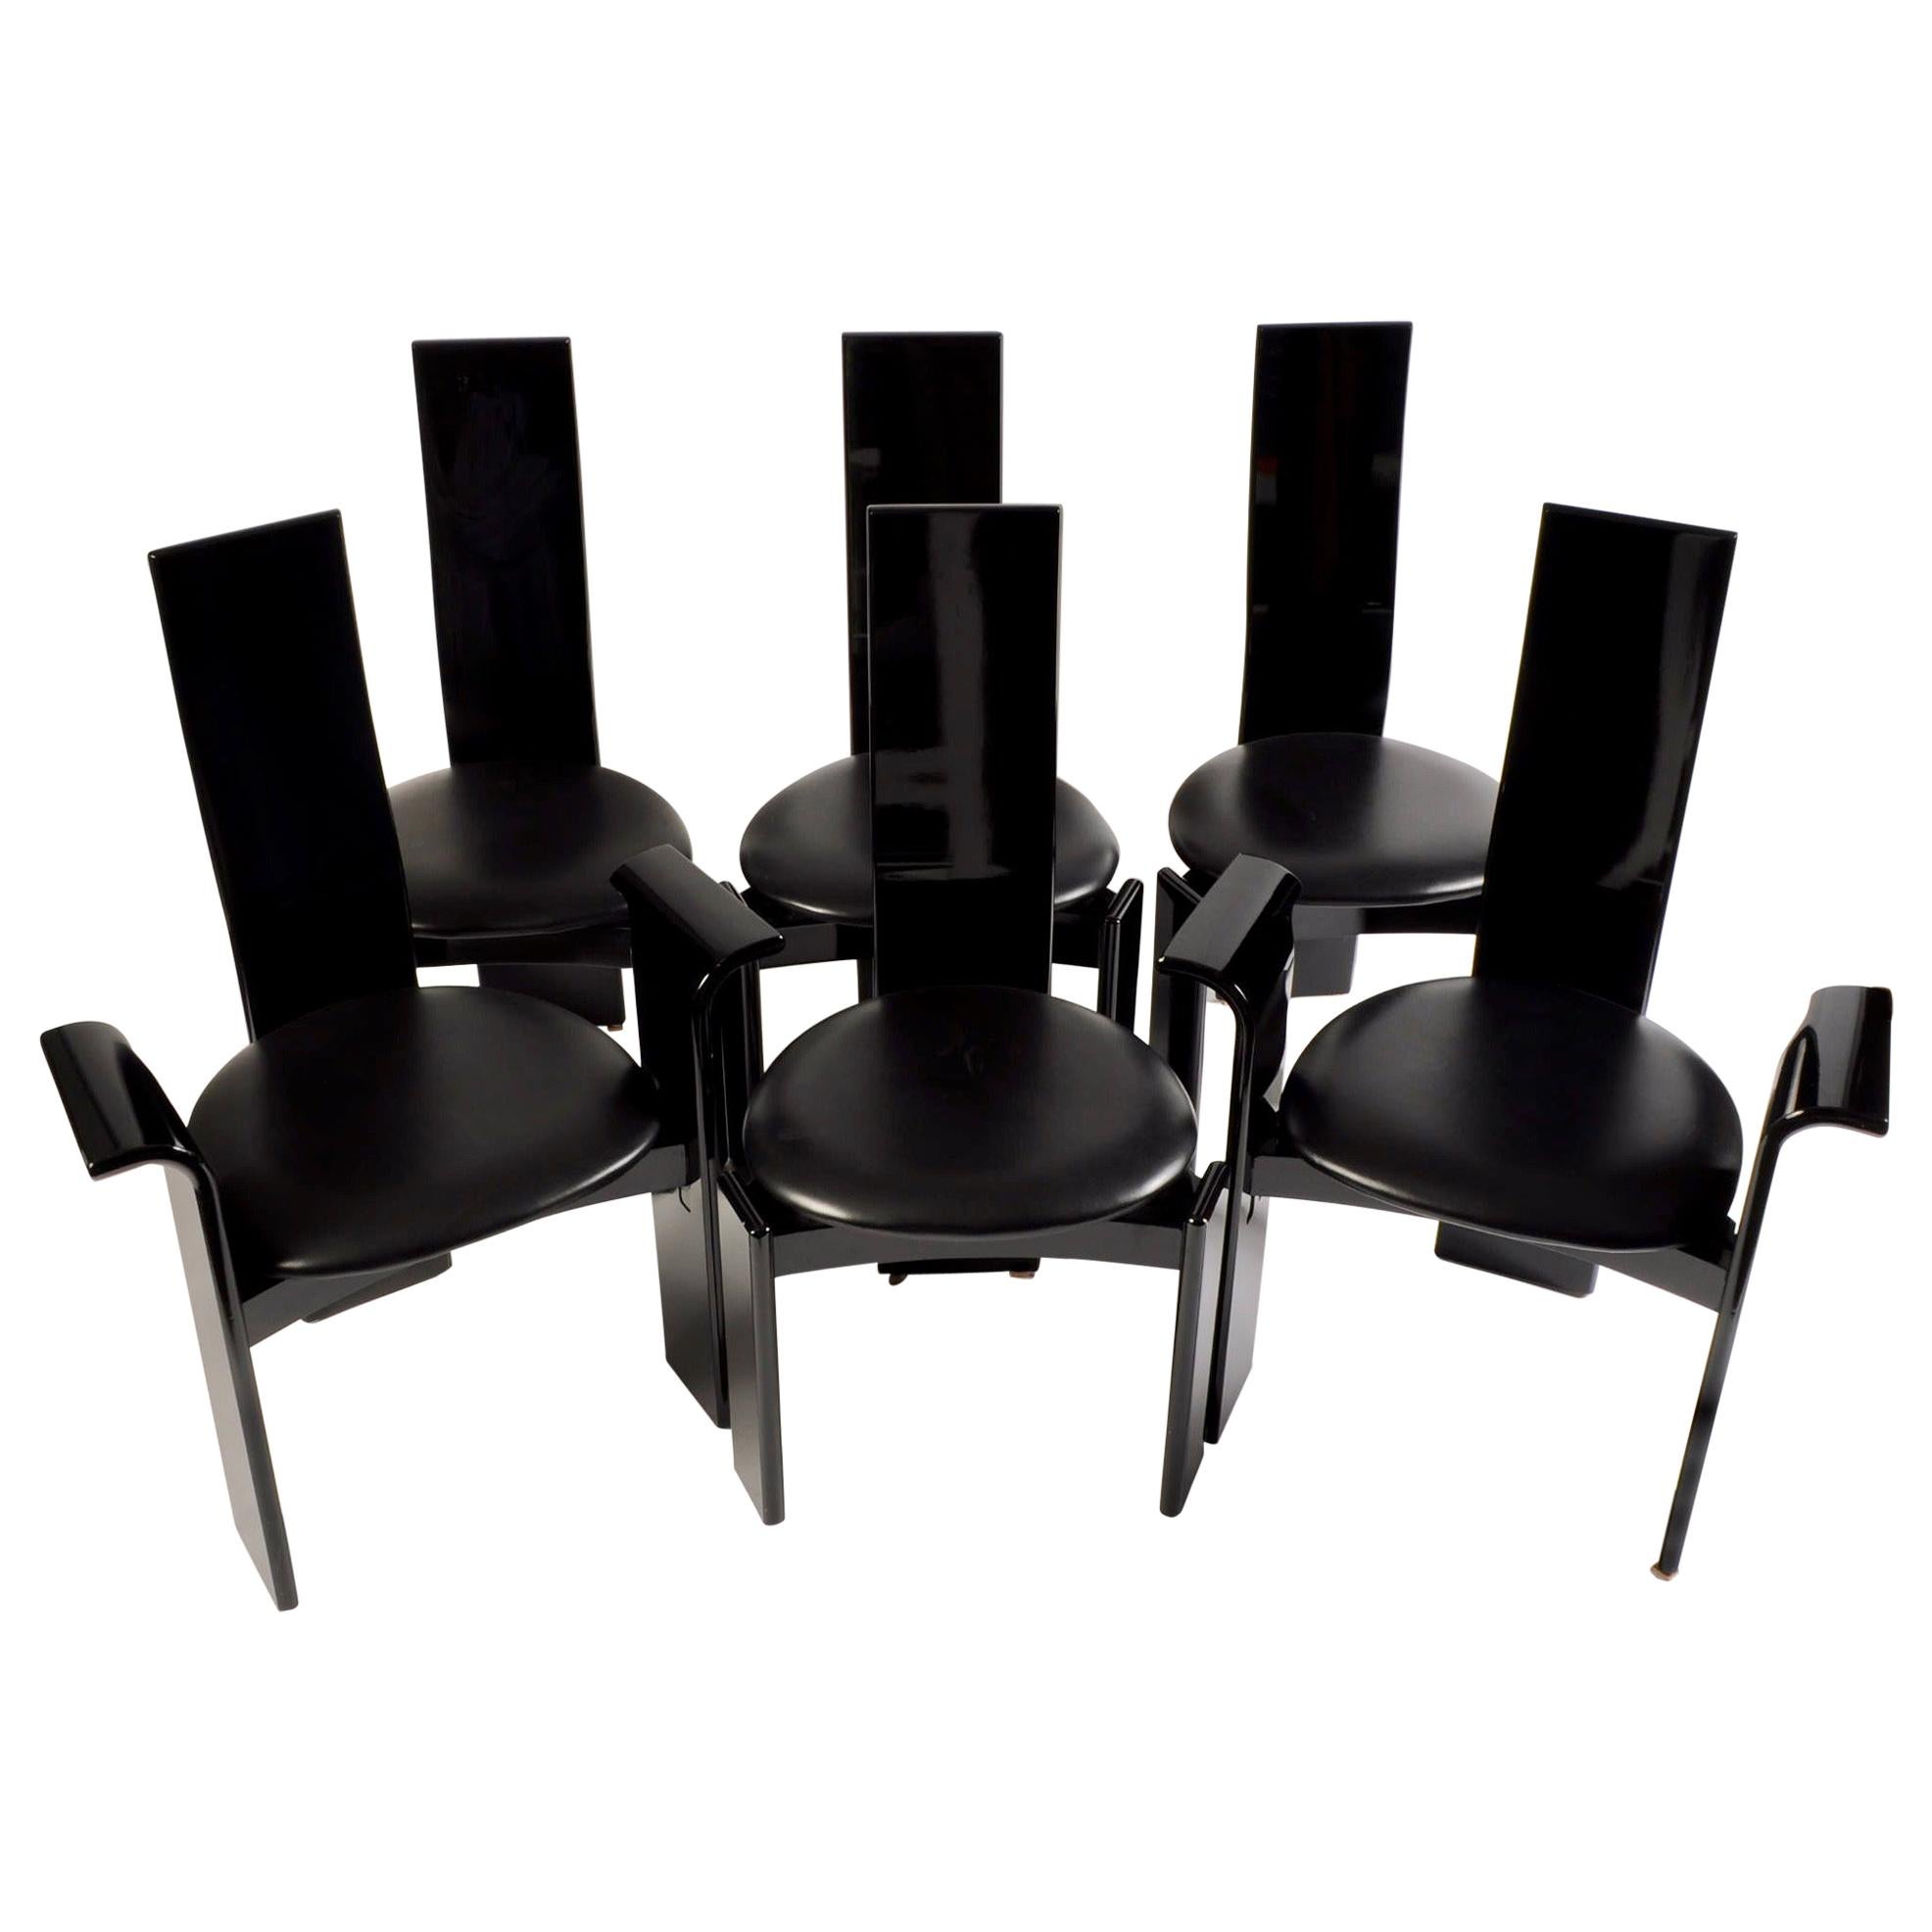 Roche Bobois Italian Lacquered High Back Dining Chairs By Pietro Costantini